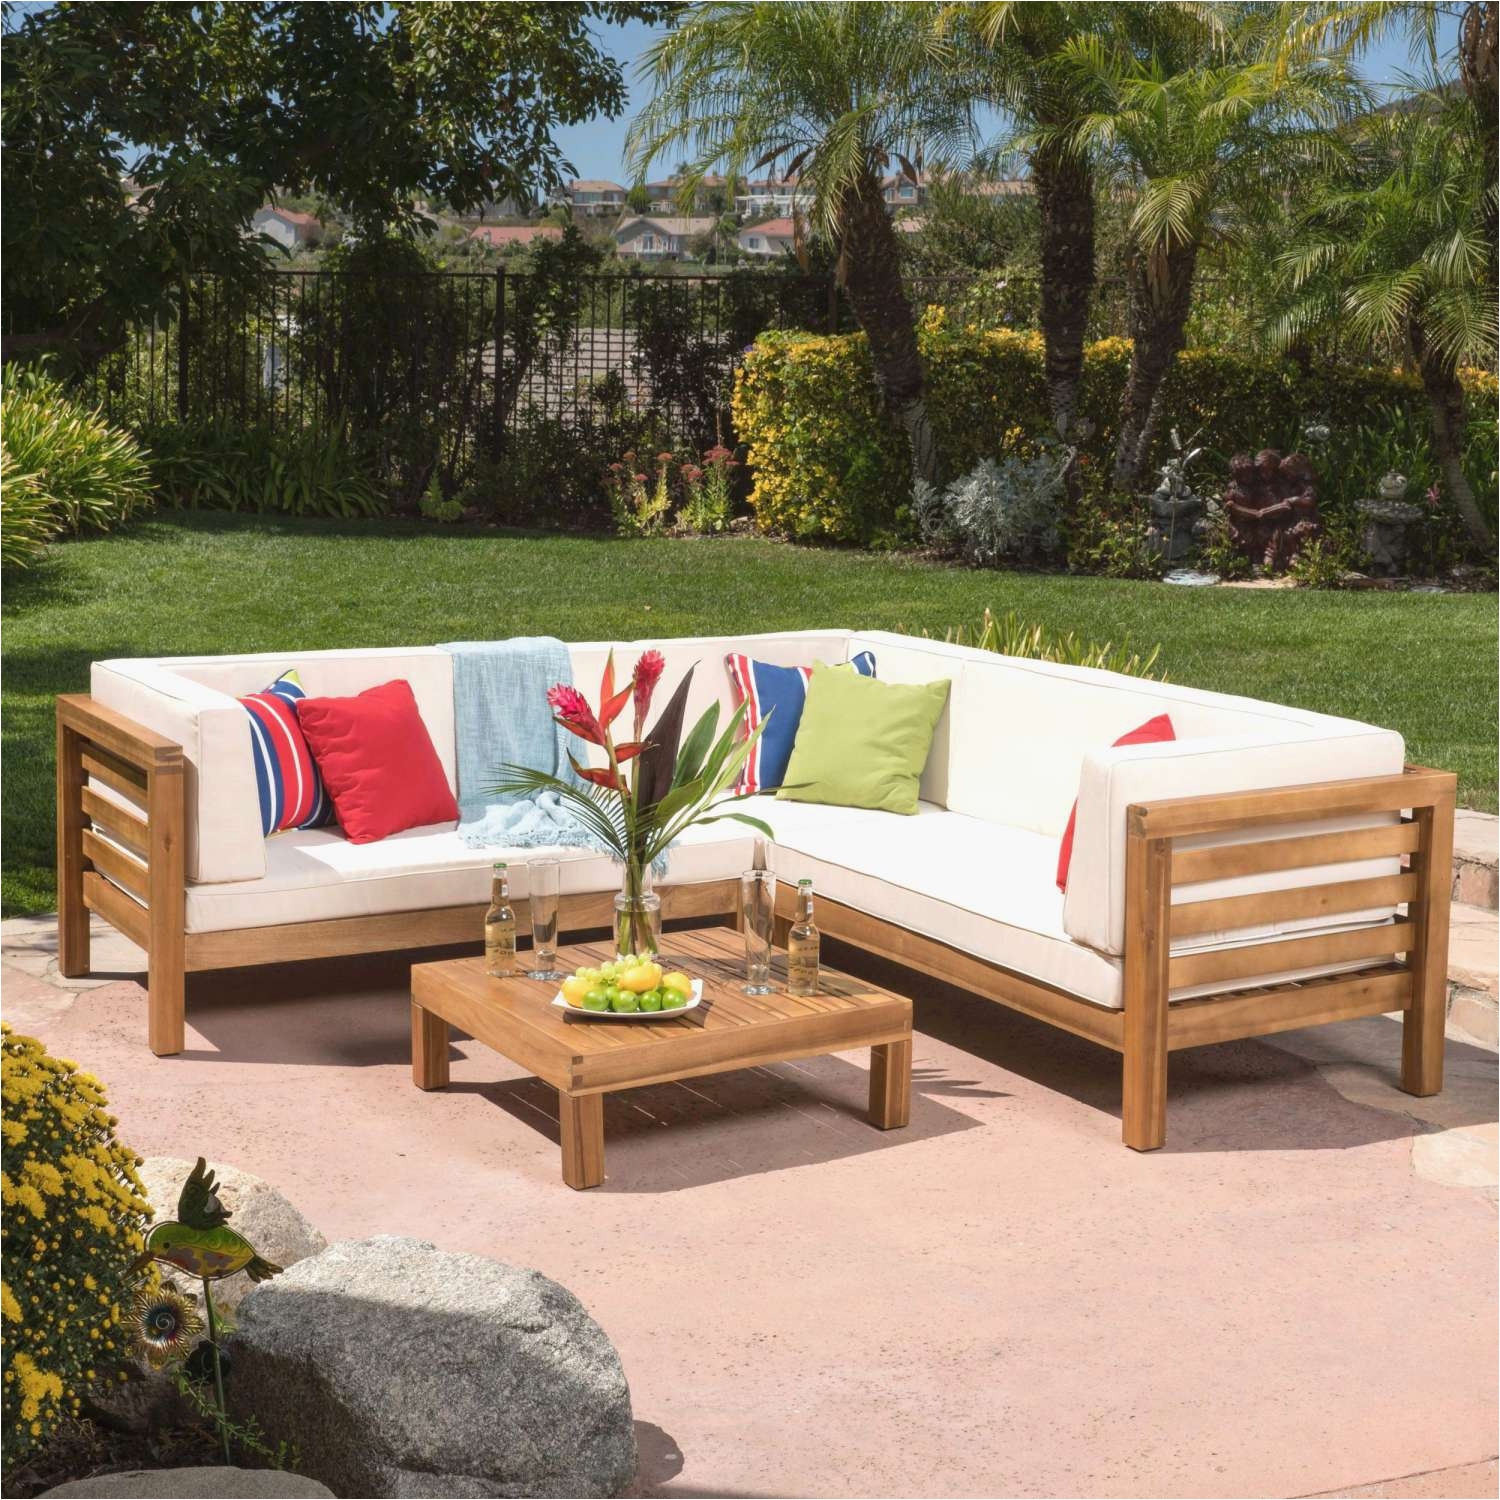 used tommy bahama furniture unique tommy bahama outdoor furniture luxury outdoor sofa 0d patio chairs image